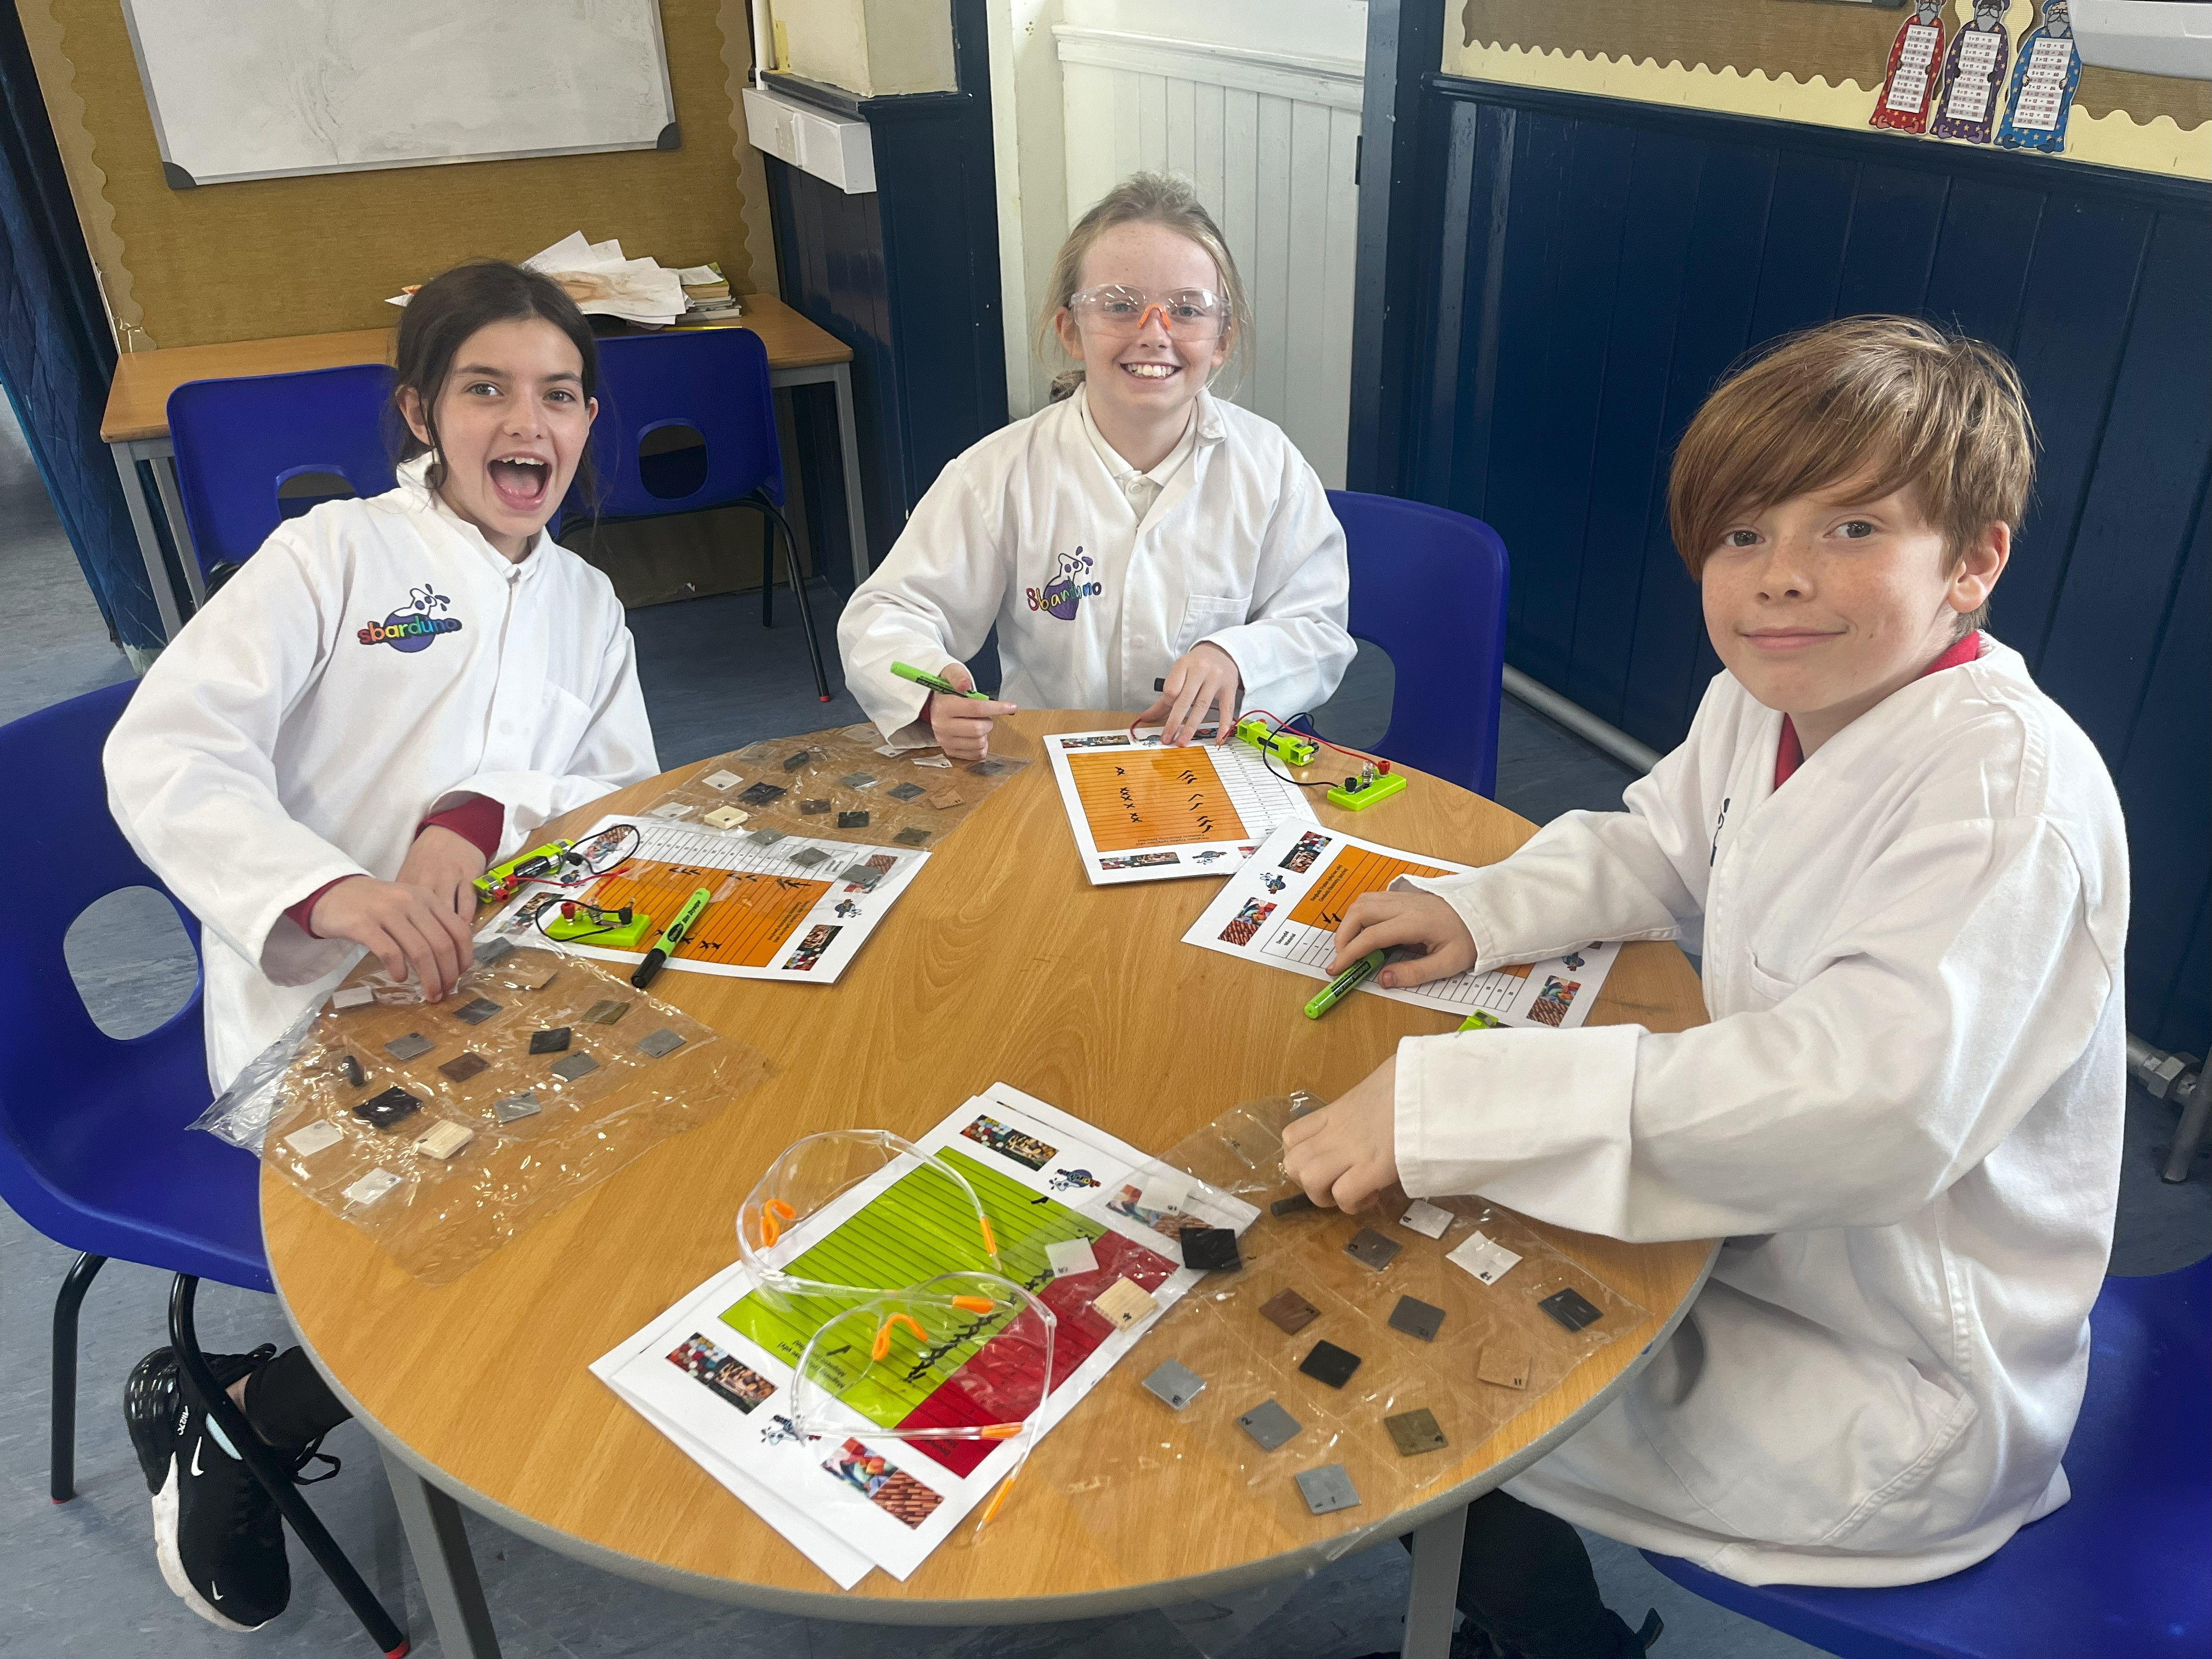 Three primary school children in Wales sat around a table wearing white lab coats, carrying out a science exercise.